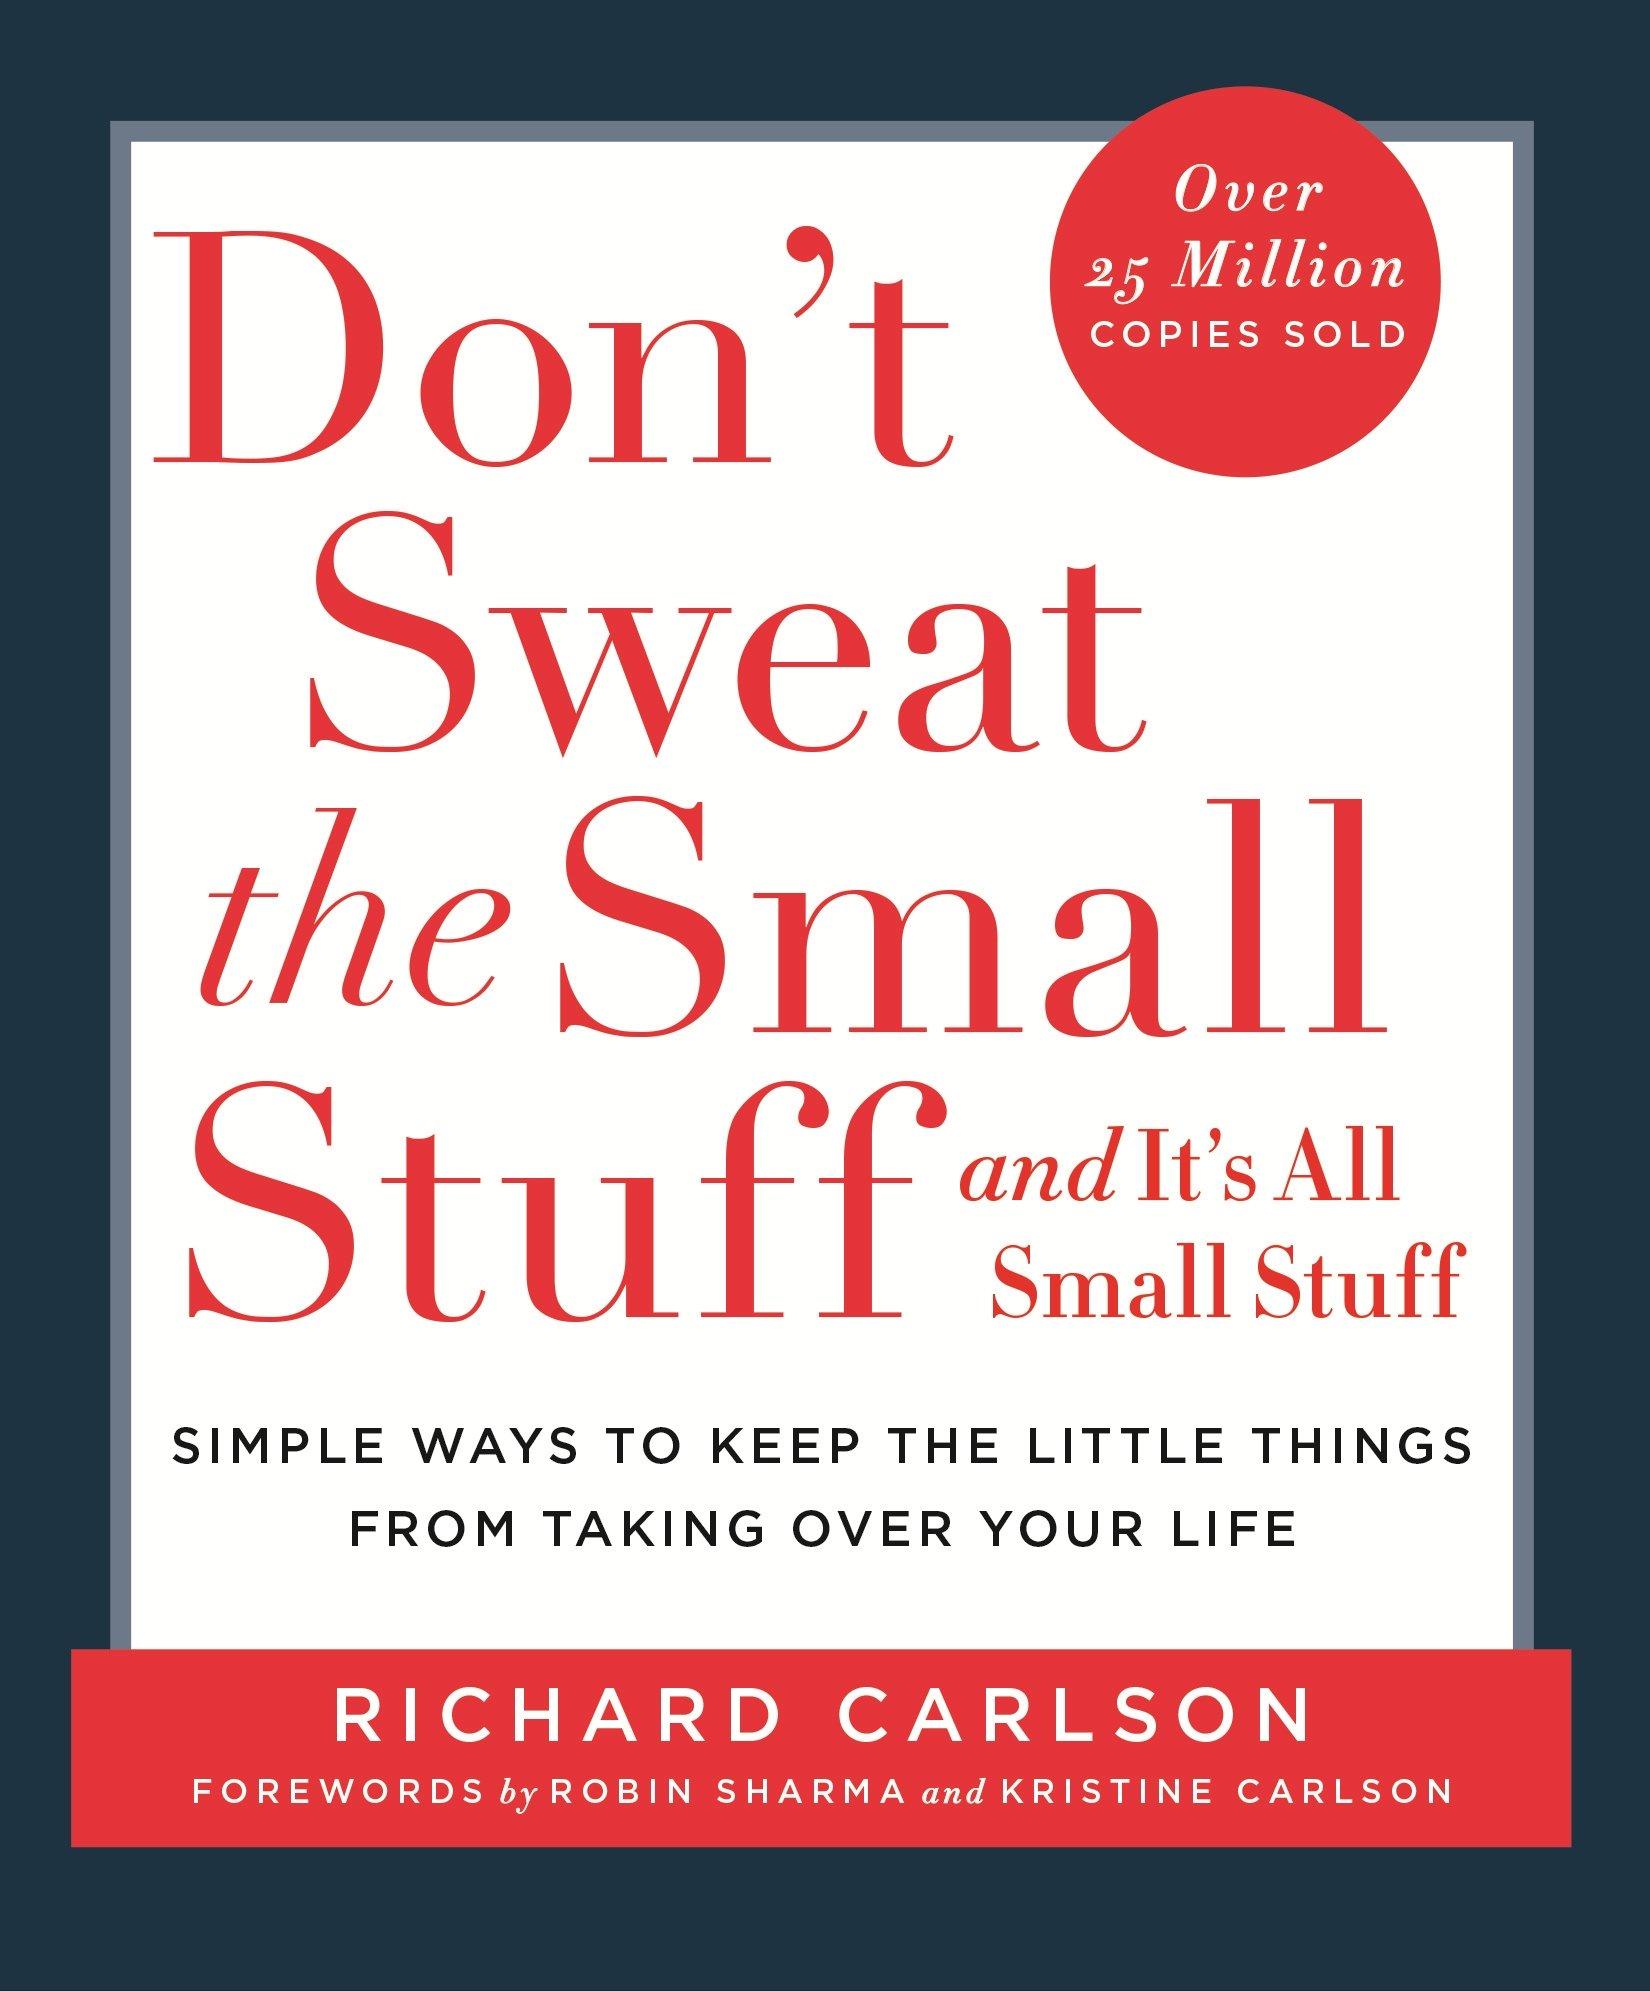 Don't Sweat The Small Stuff And It's All Small Stuff by Richard Carlson